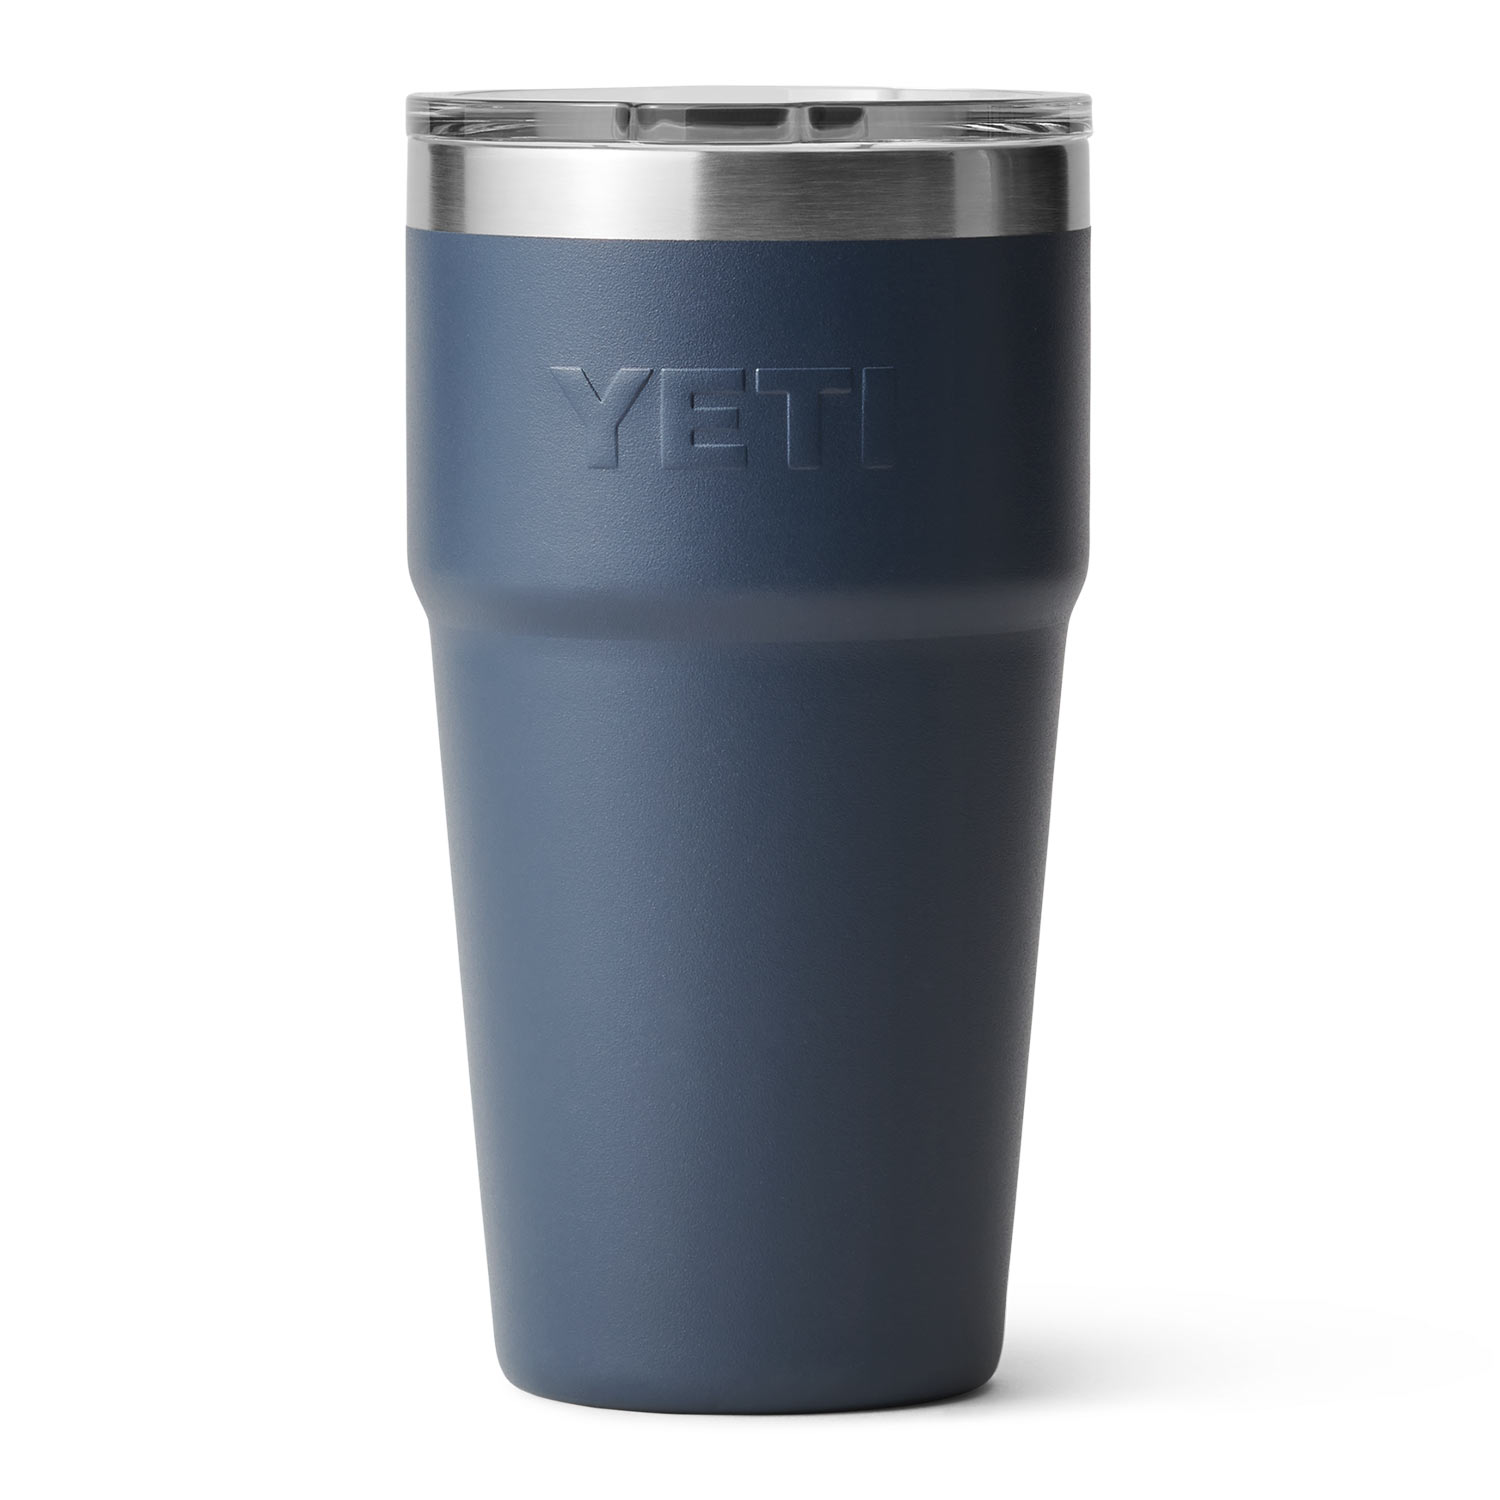 MightySkins YEPINT16SI-Solid Blue Skin for Yeti Rambler 16 oz Stackable Cup  - Solid Blue 